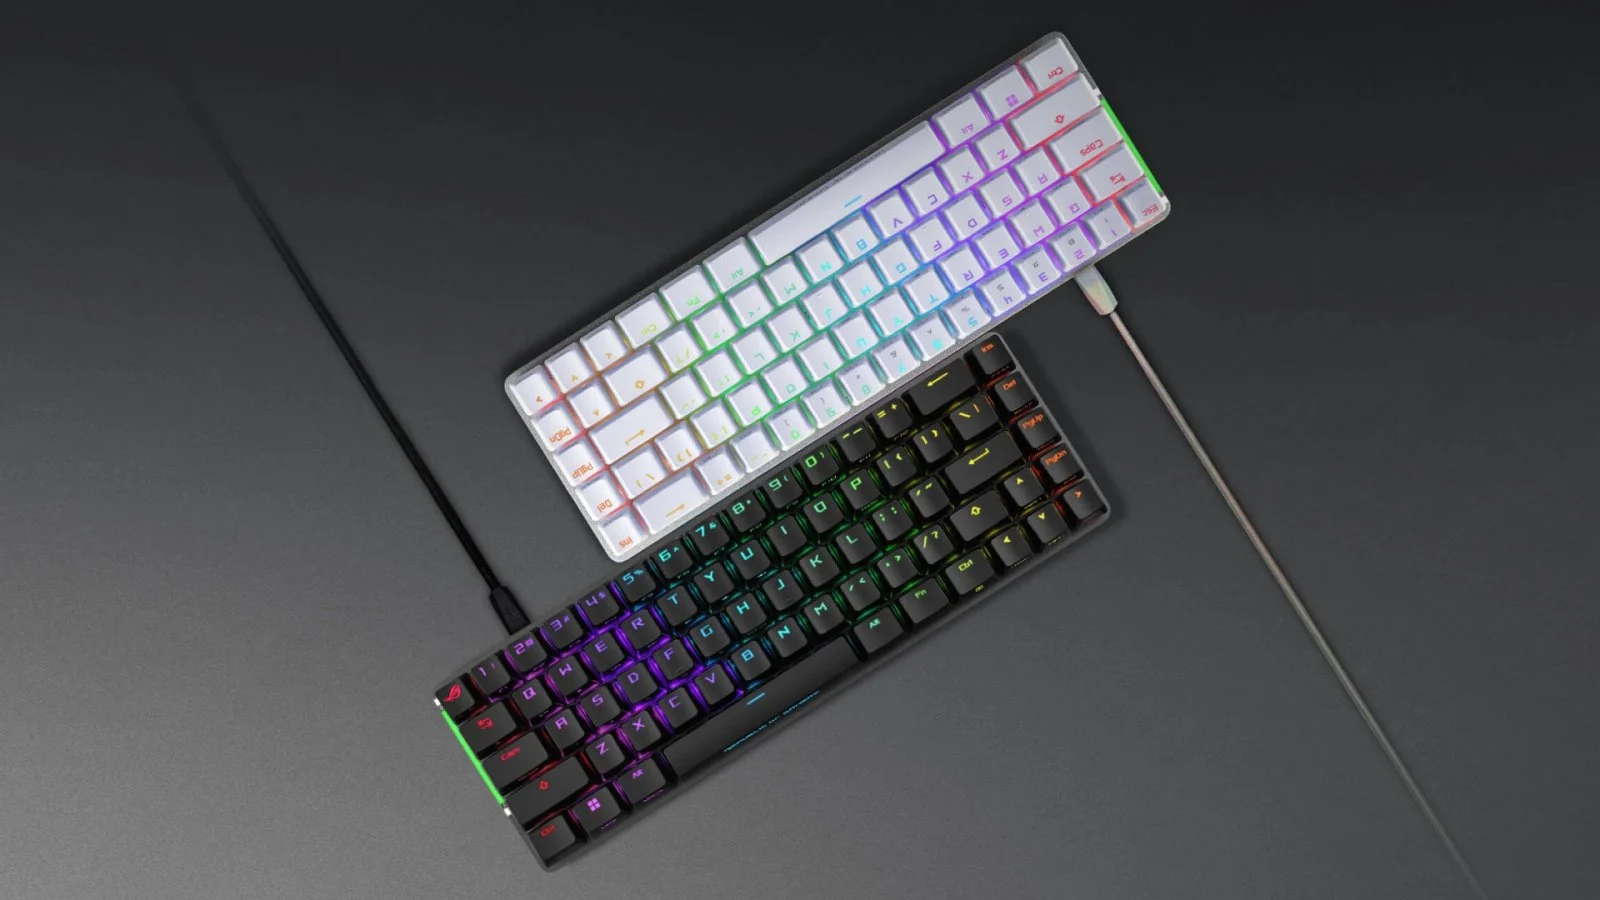 ASUS Republic of Gamers announces the Falchion Ace keyboard